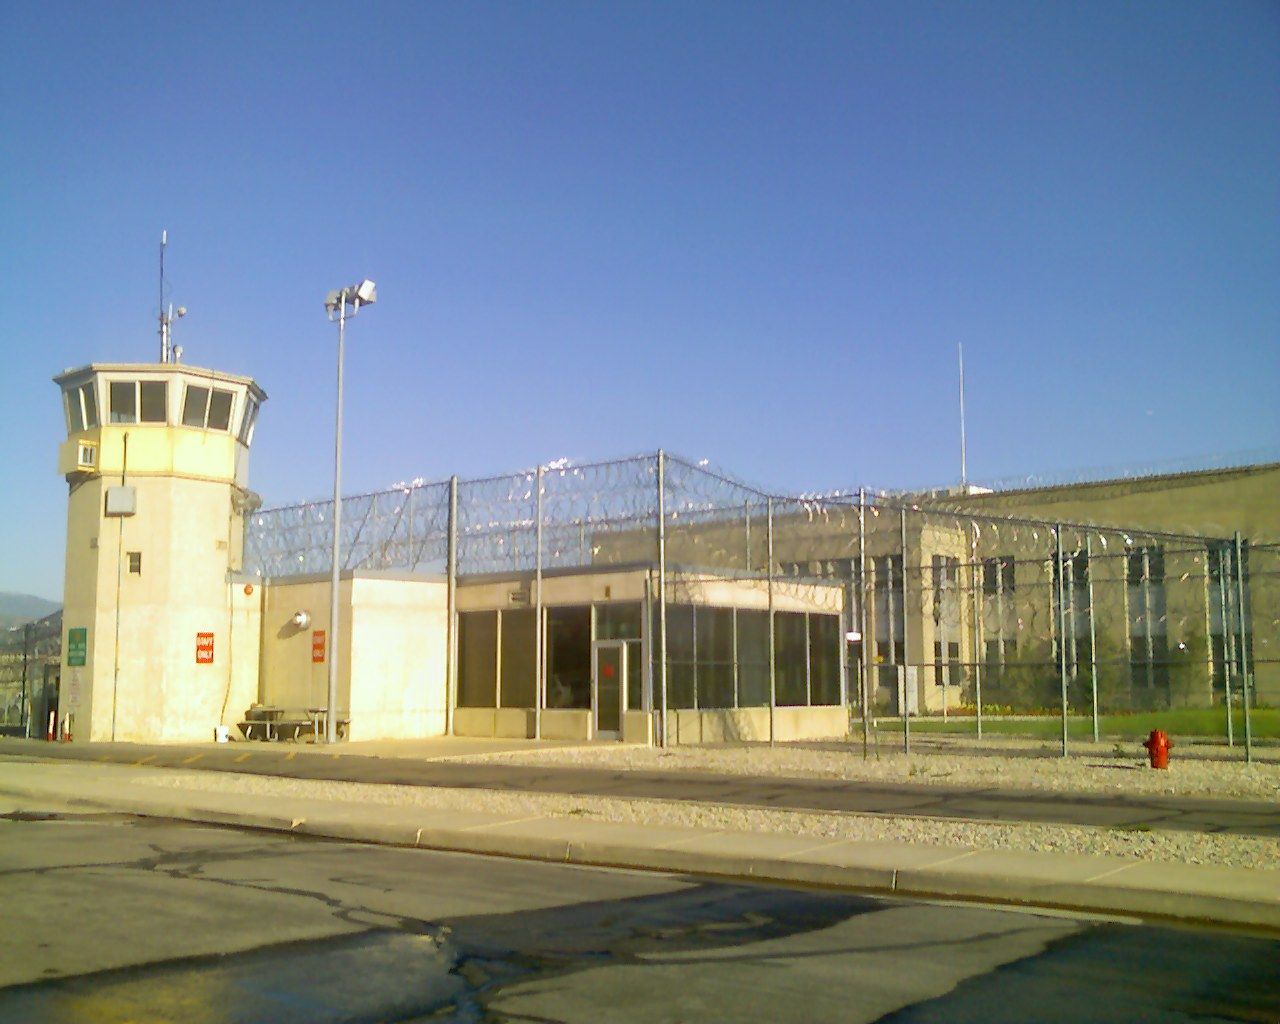 outside of prison showing wire fence